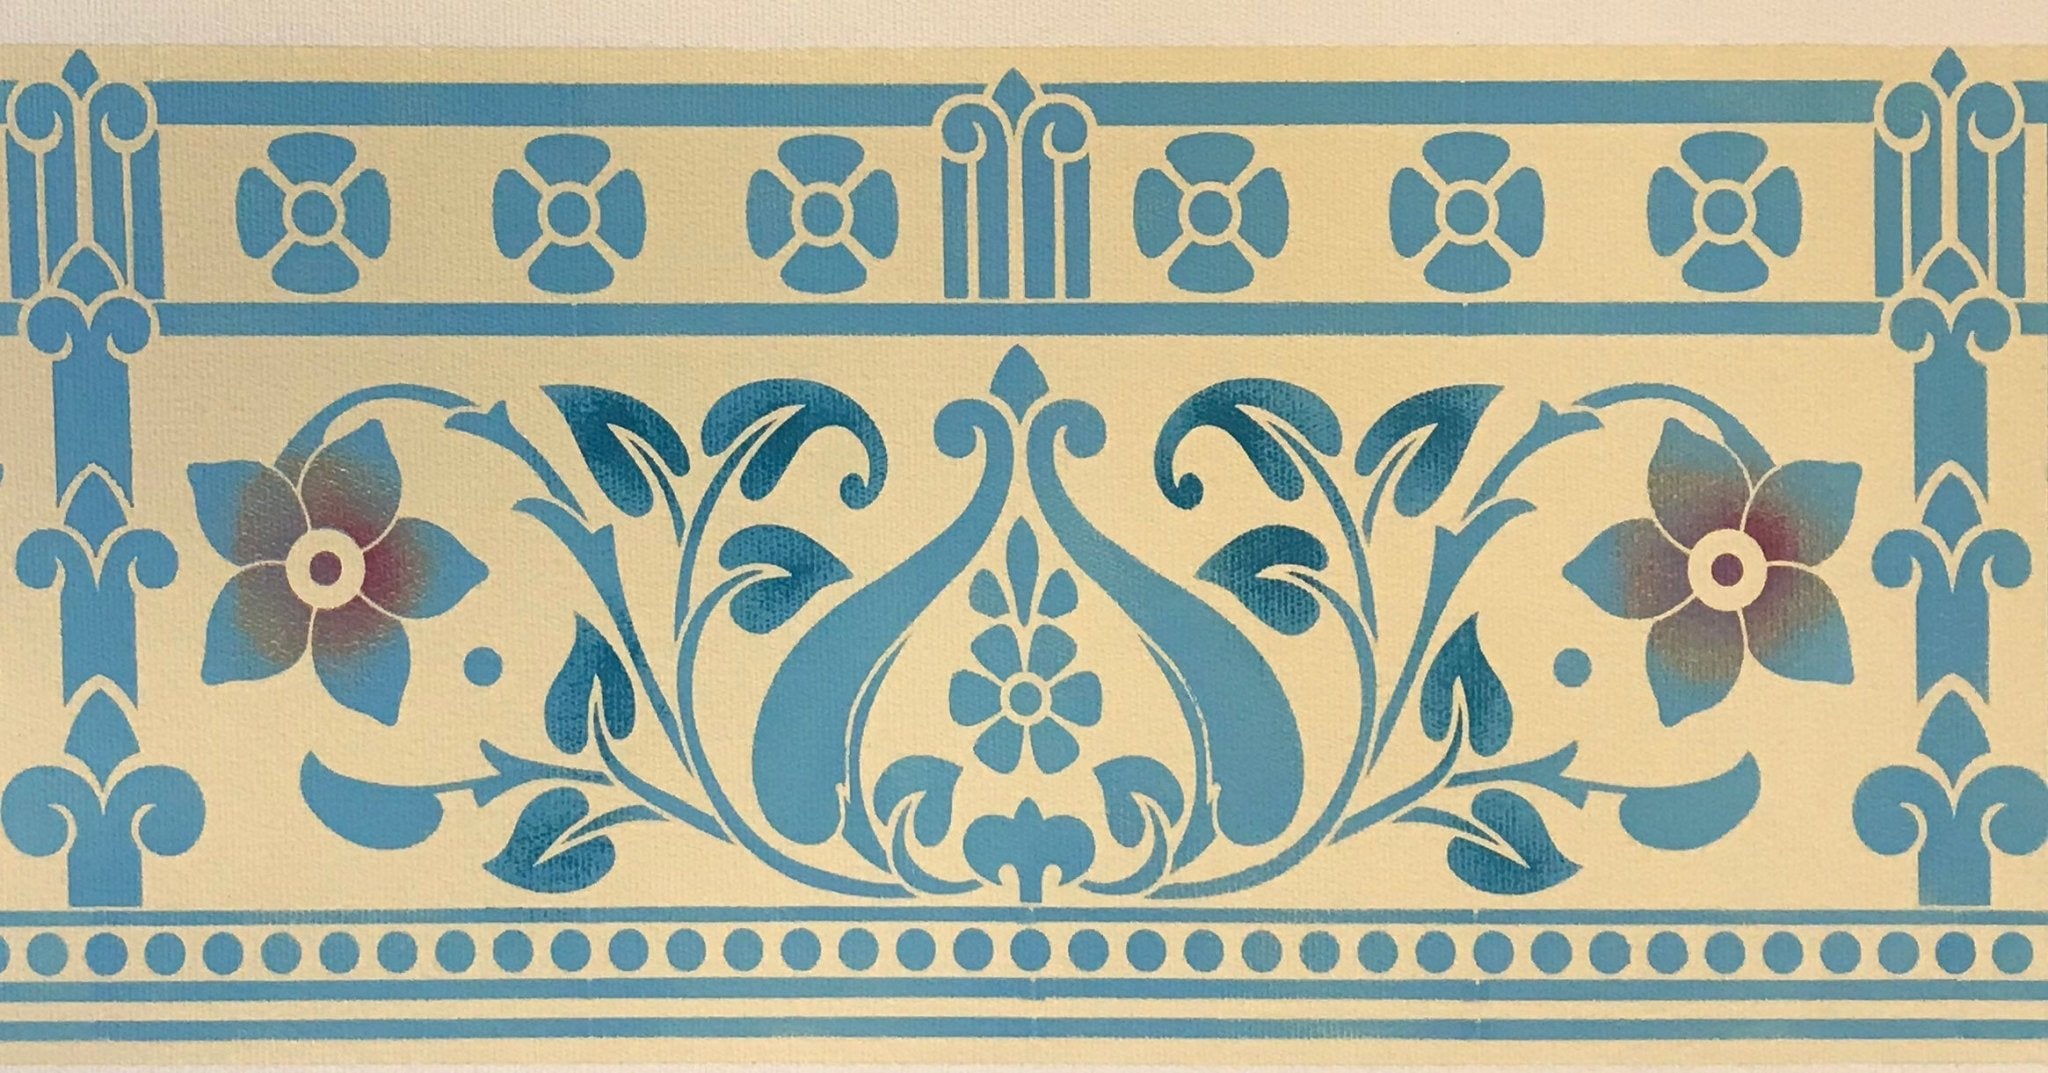 A close up of the border of this floorcloth with a pattern based on a Christopher Dresser design, c. 1875.  The leaves have been highlighted in a darker blue and the center of the flowers are highlighted in a mix of gold and red.